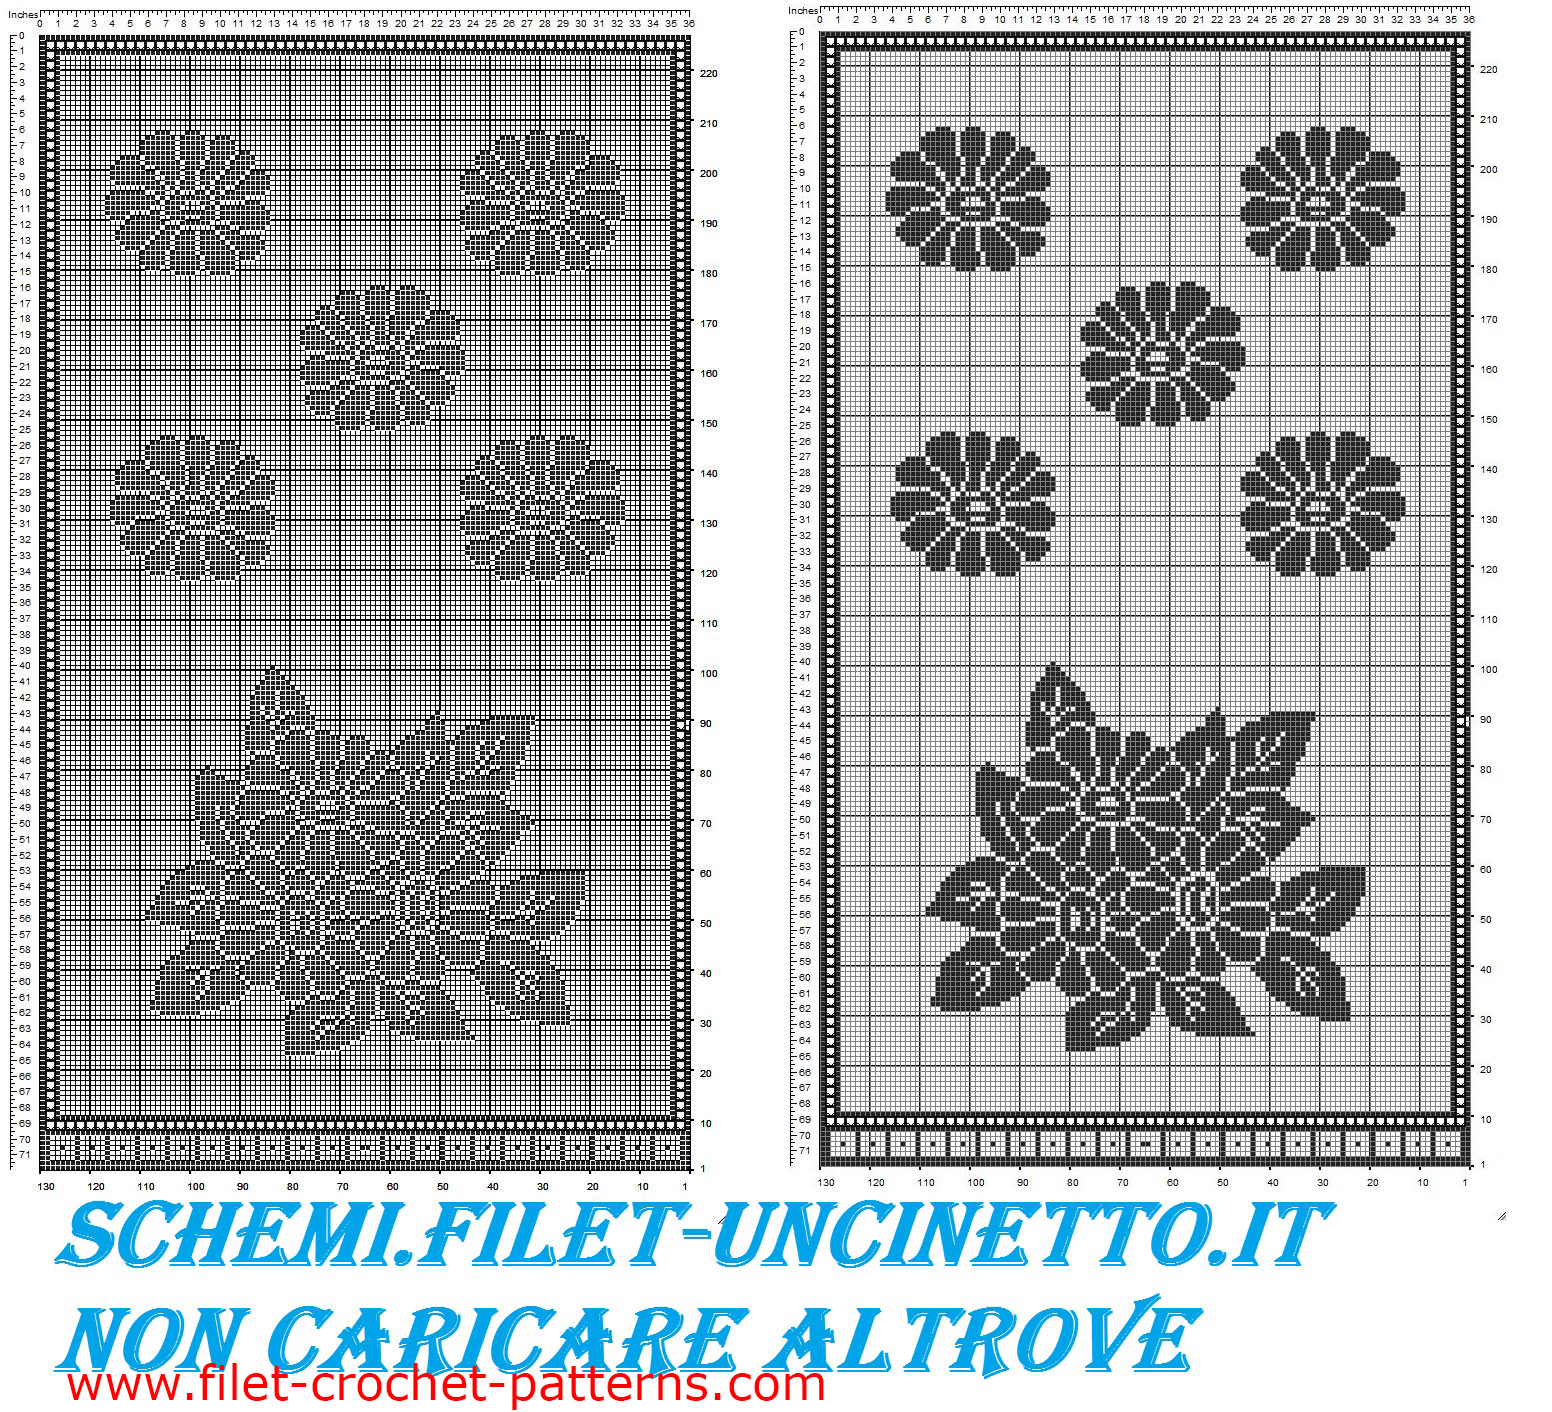 Free filet corchet pattern curtains with sunflowers